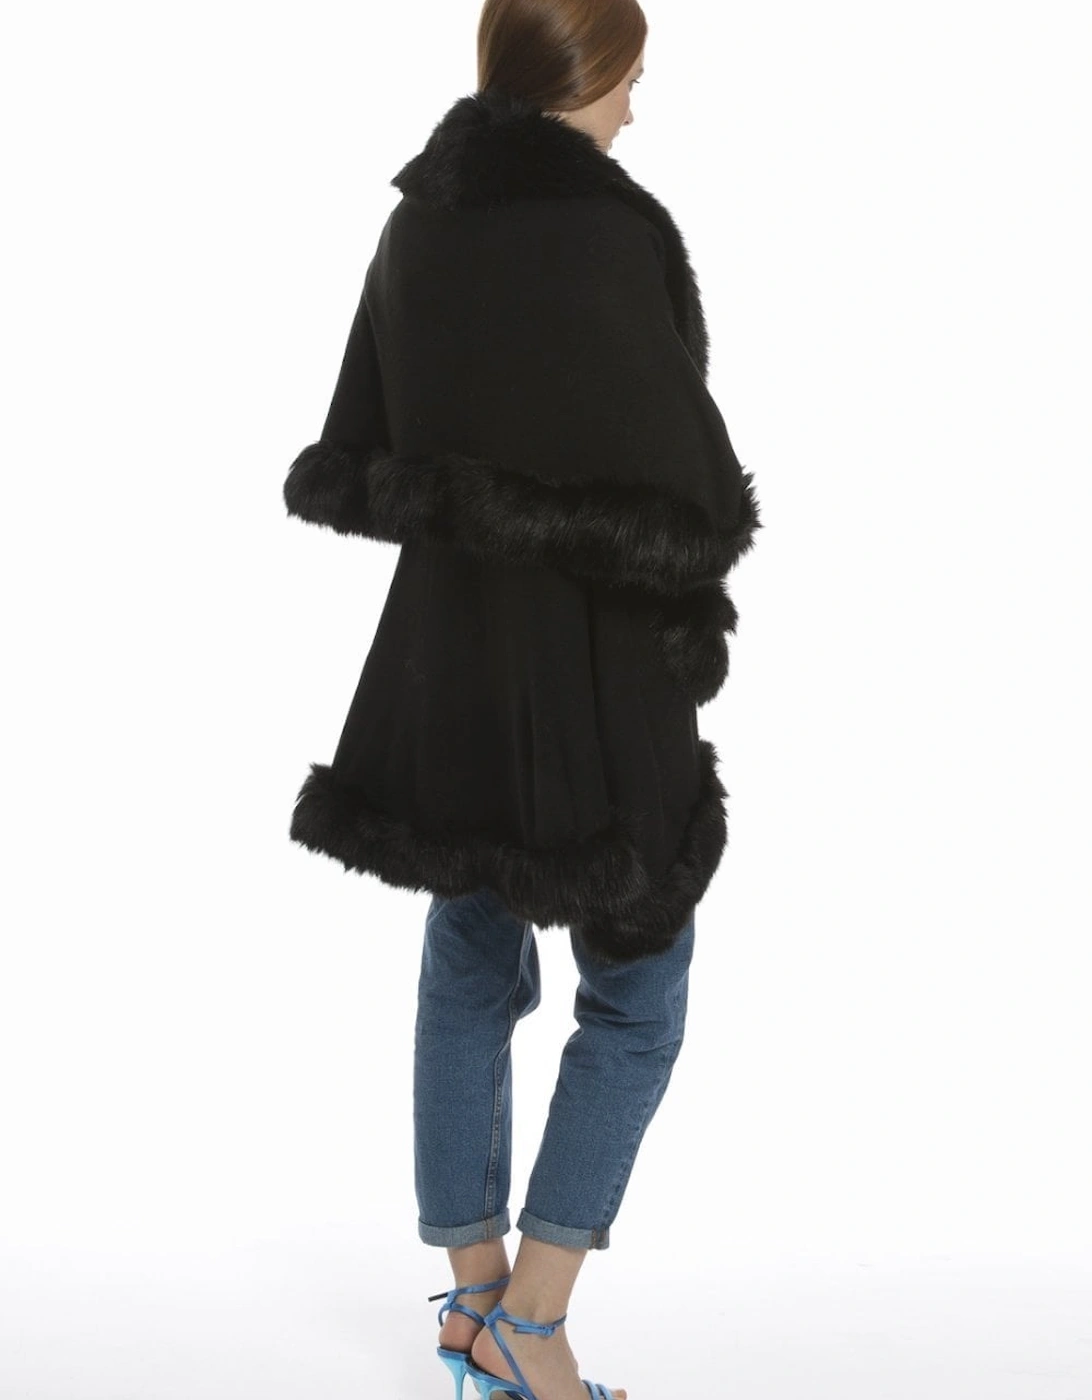 Black Knitted Luxury Faux Fur Cape